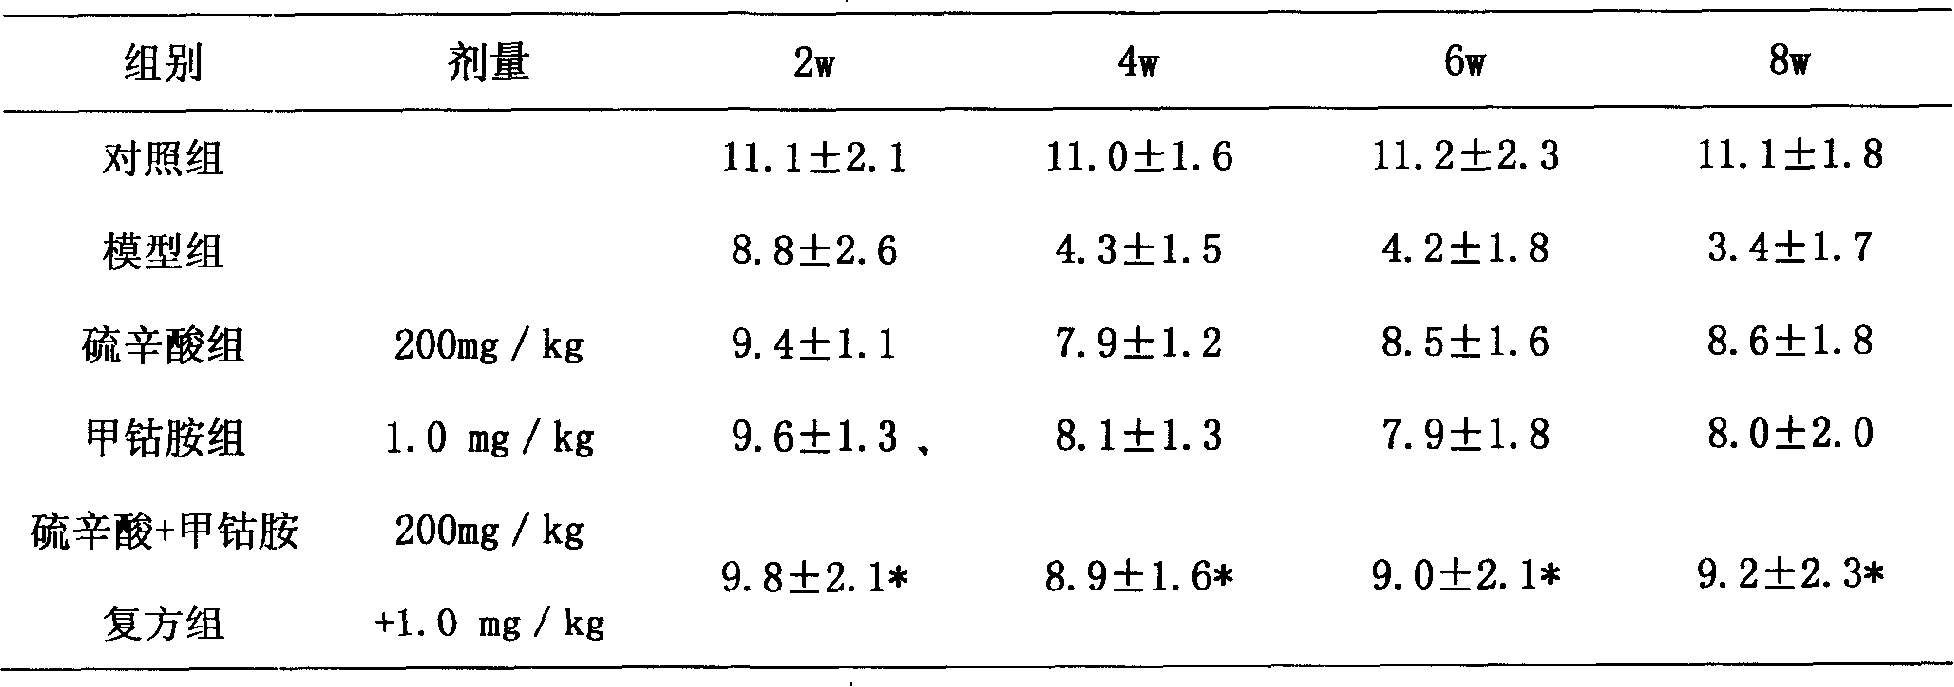 Pharmaceutical composition containing lipoic acid and mecobalamin and preparation thereof